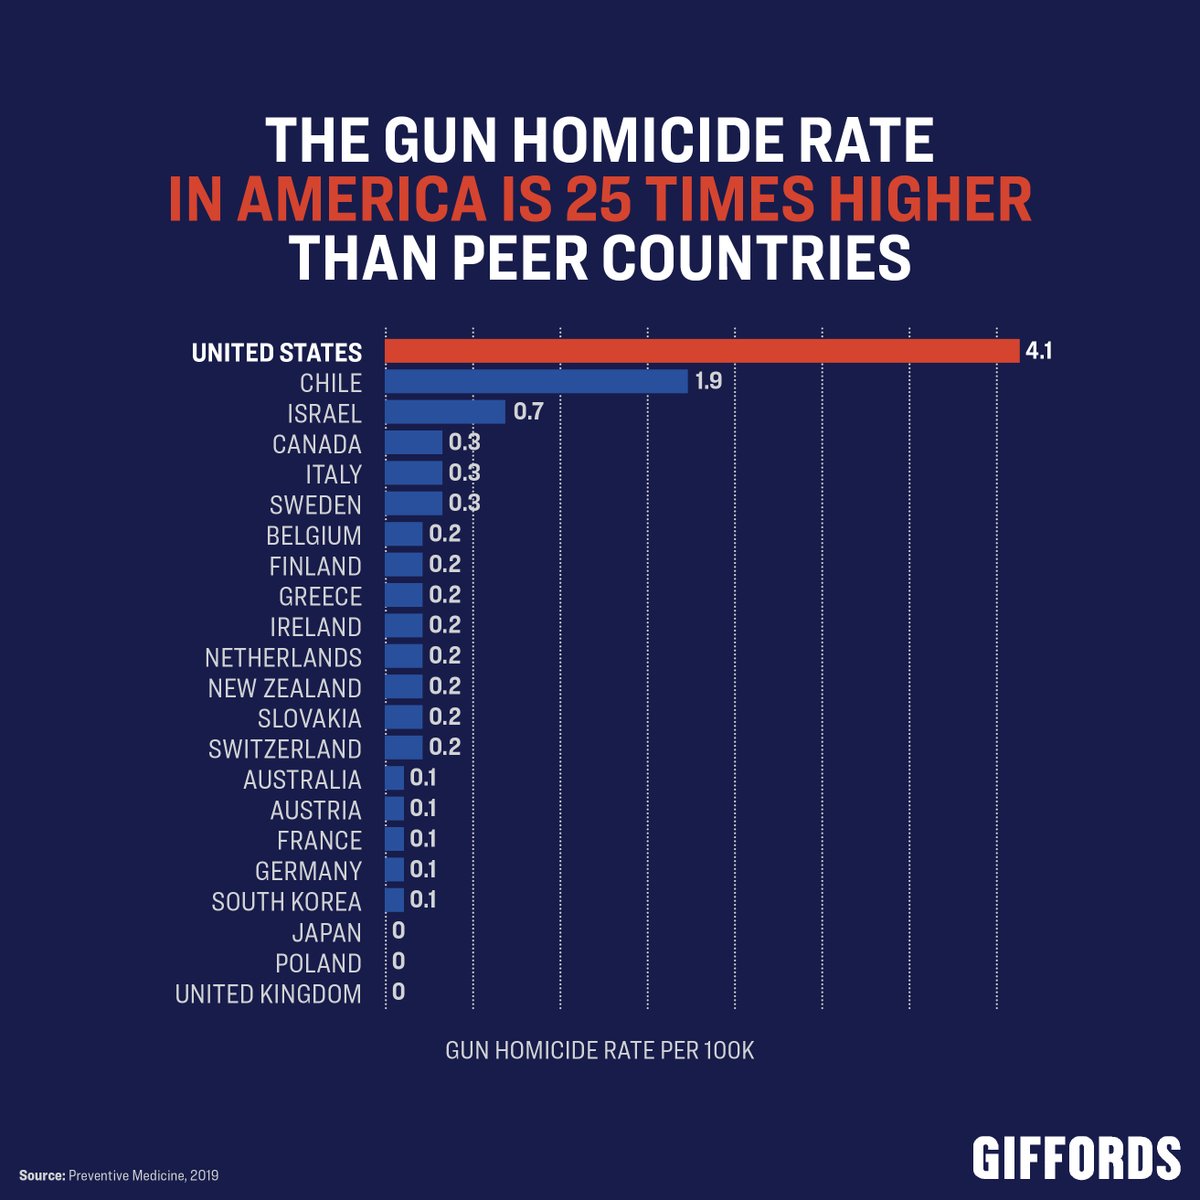 If more guns in more places made us safer, we'd be the safest country in the world. But we're clearly not. Our elected officials must take immediate action to build safer communities and save lives.